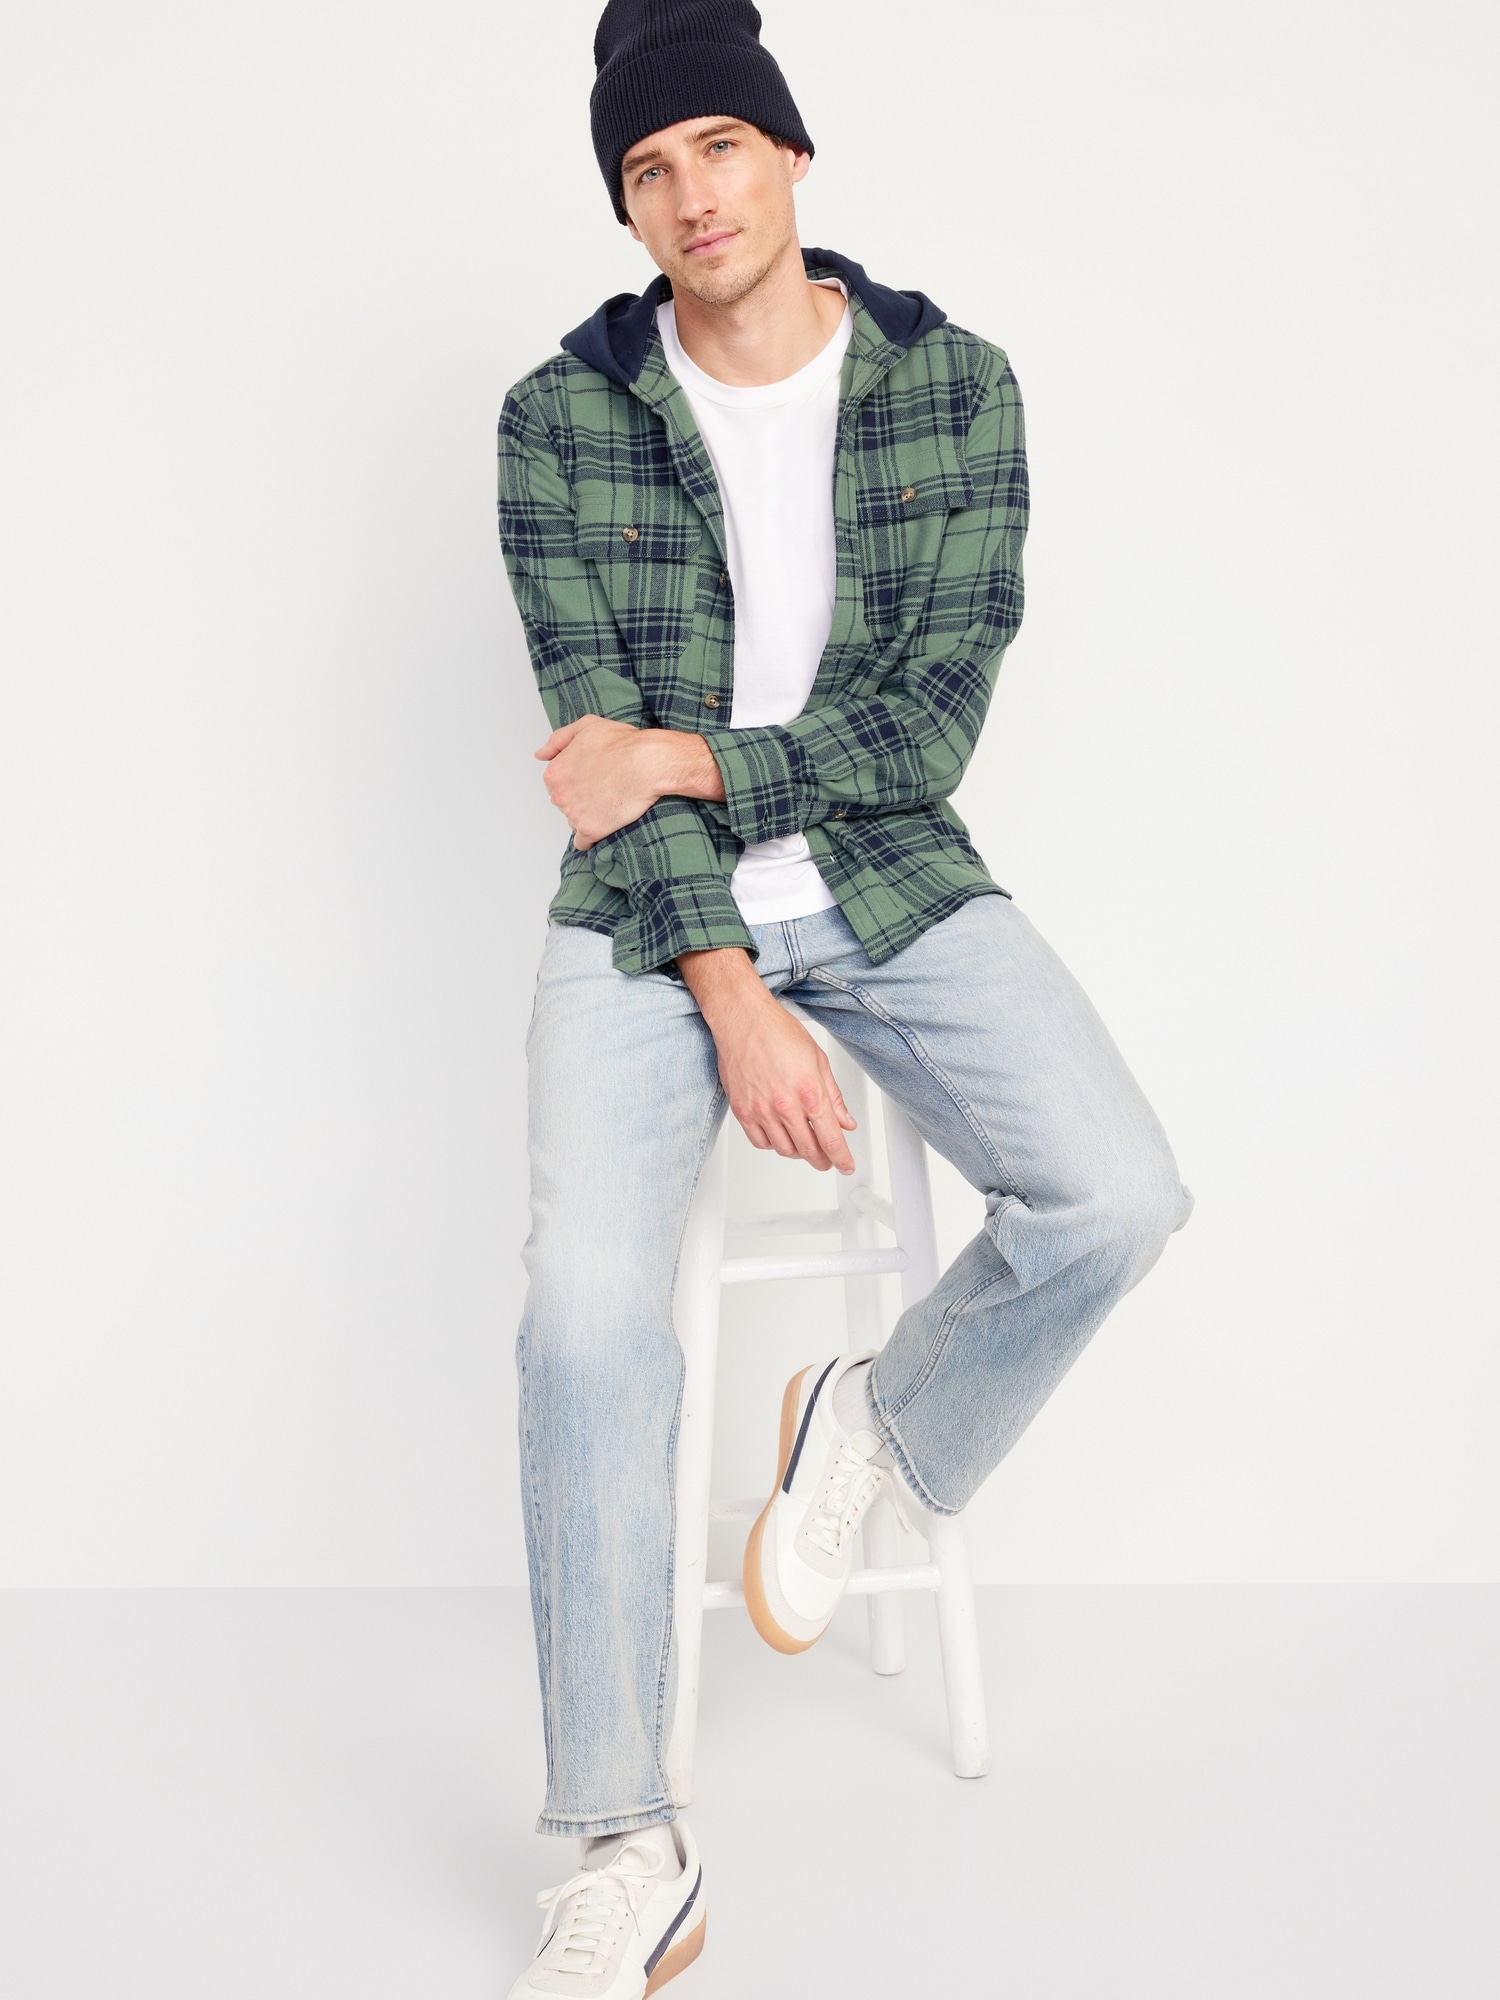 Hooded Flannel Shirt | Old Navy